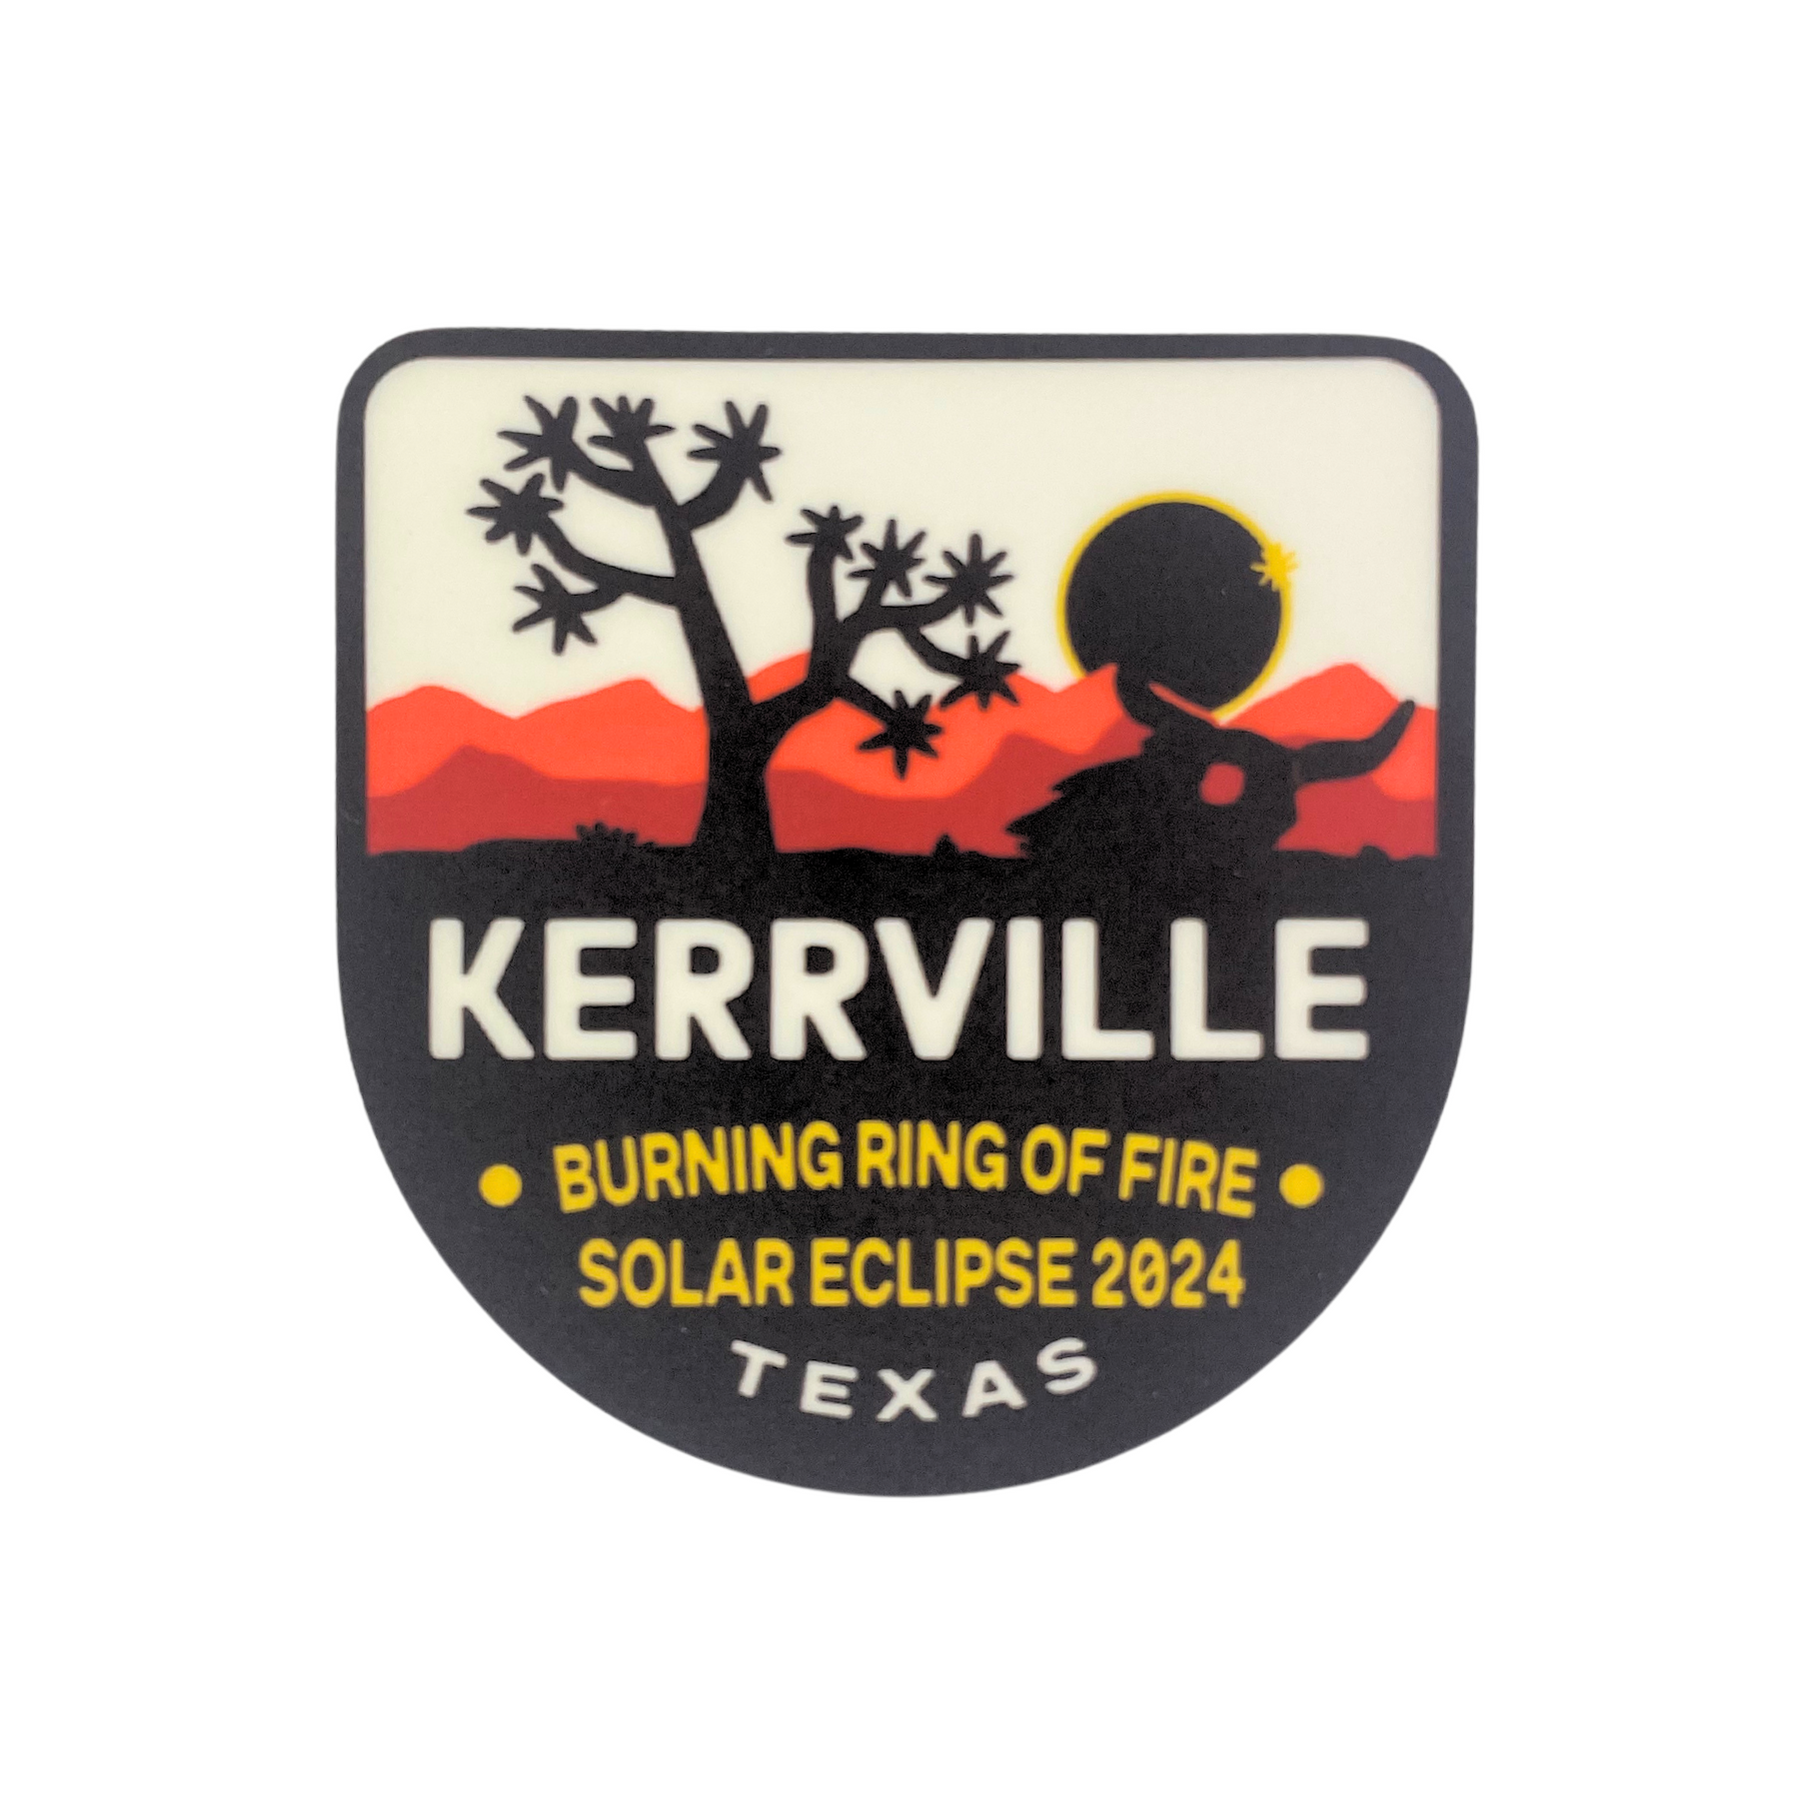 Kerrville Texas Burning Ring of Fire April 2024 Eclipse — Trudy